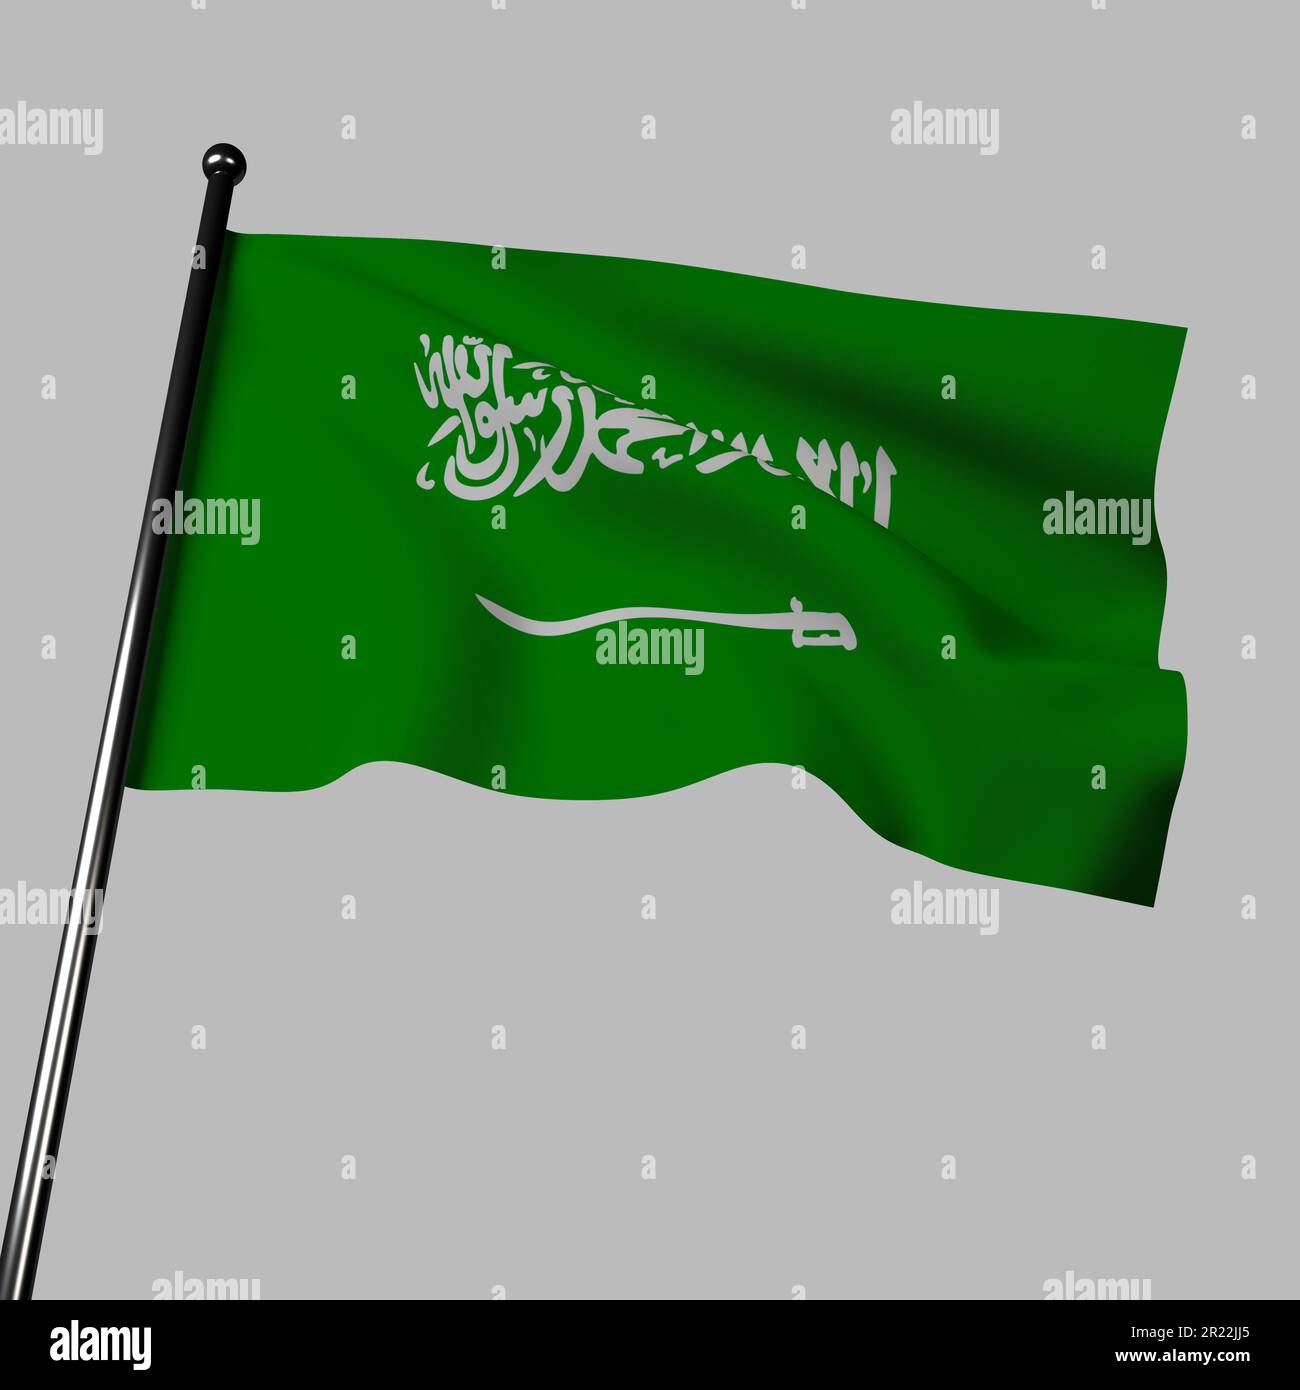 3D illustration of the Saudi Arabia flag waving in the wind. The flag features a green background, symbolizing the country's prosperity and unity, wit Stock Photo